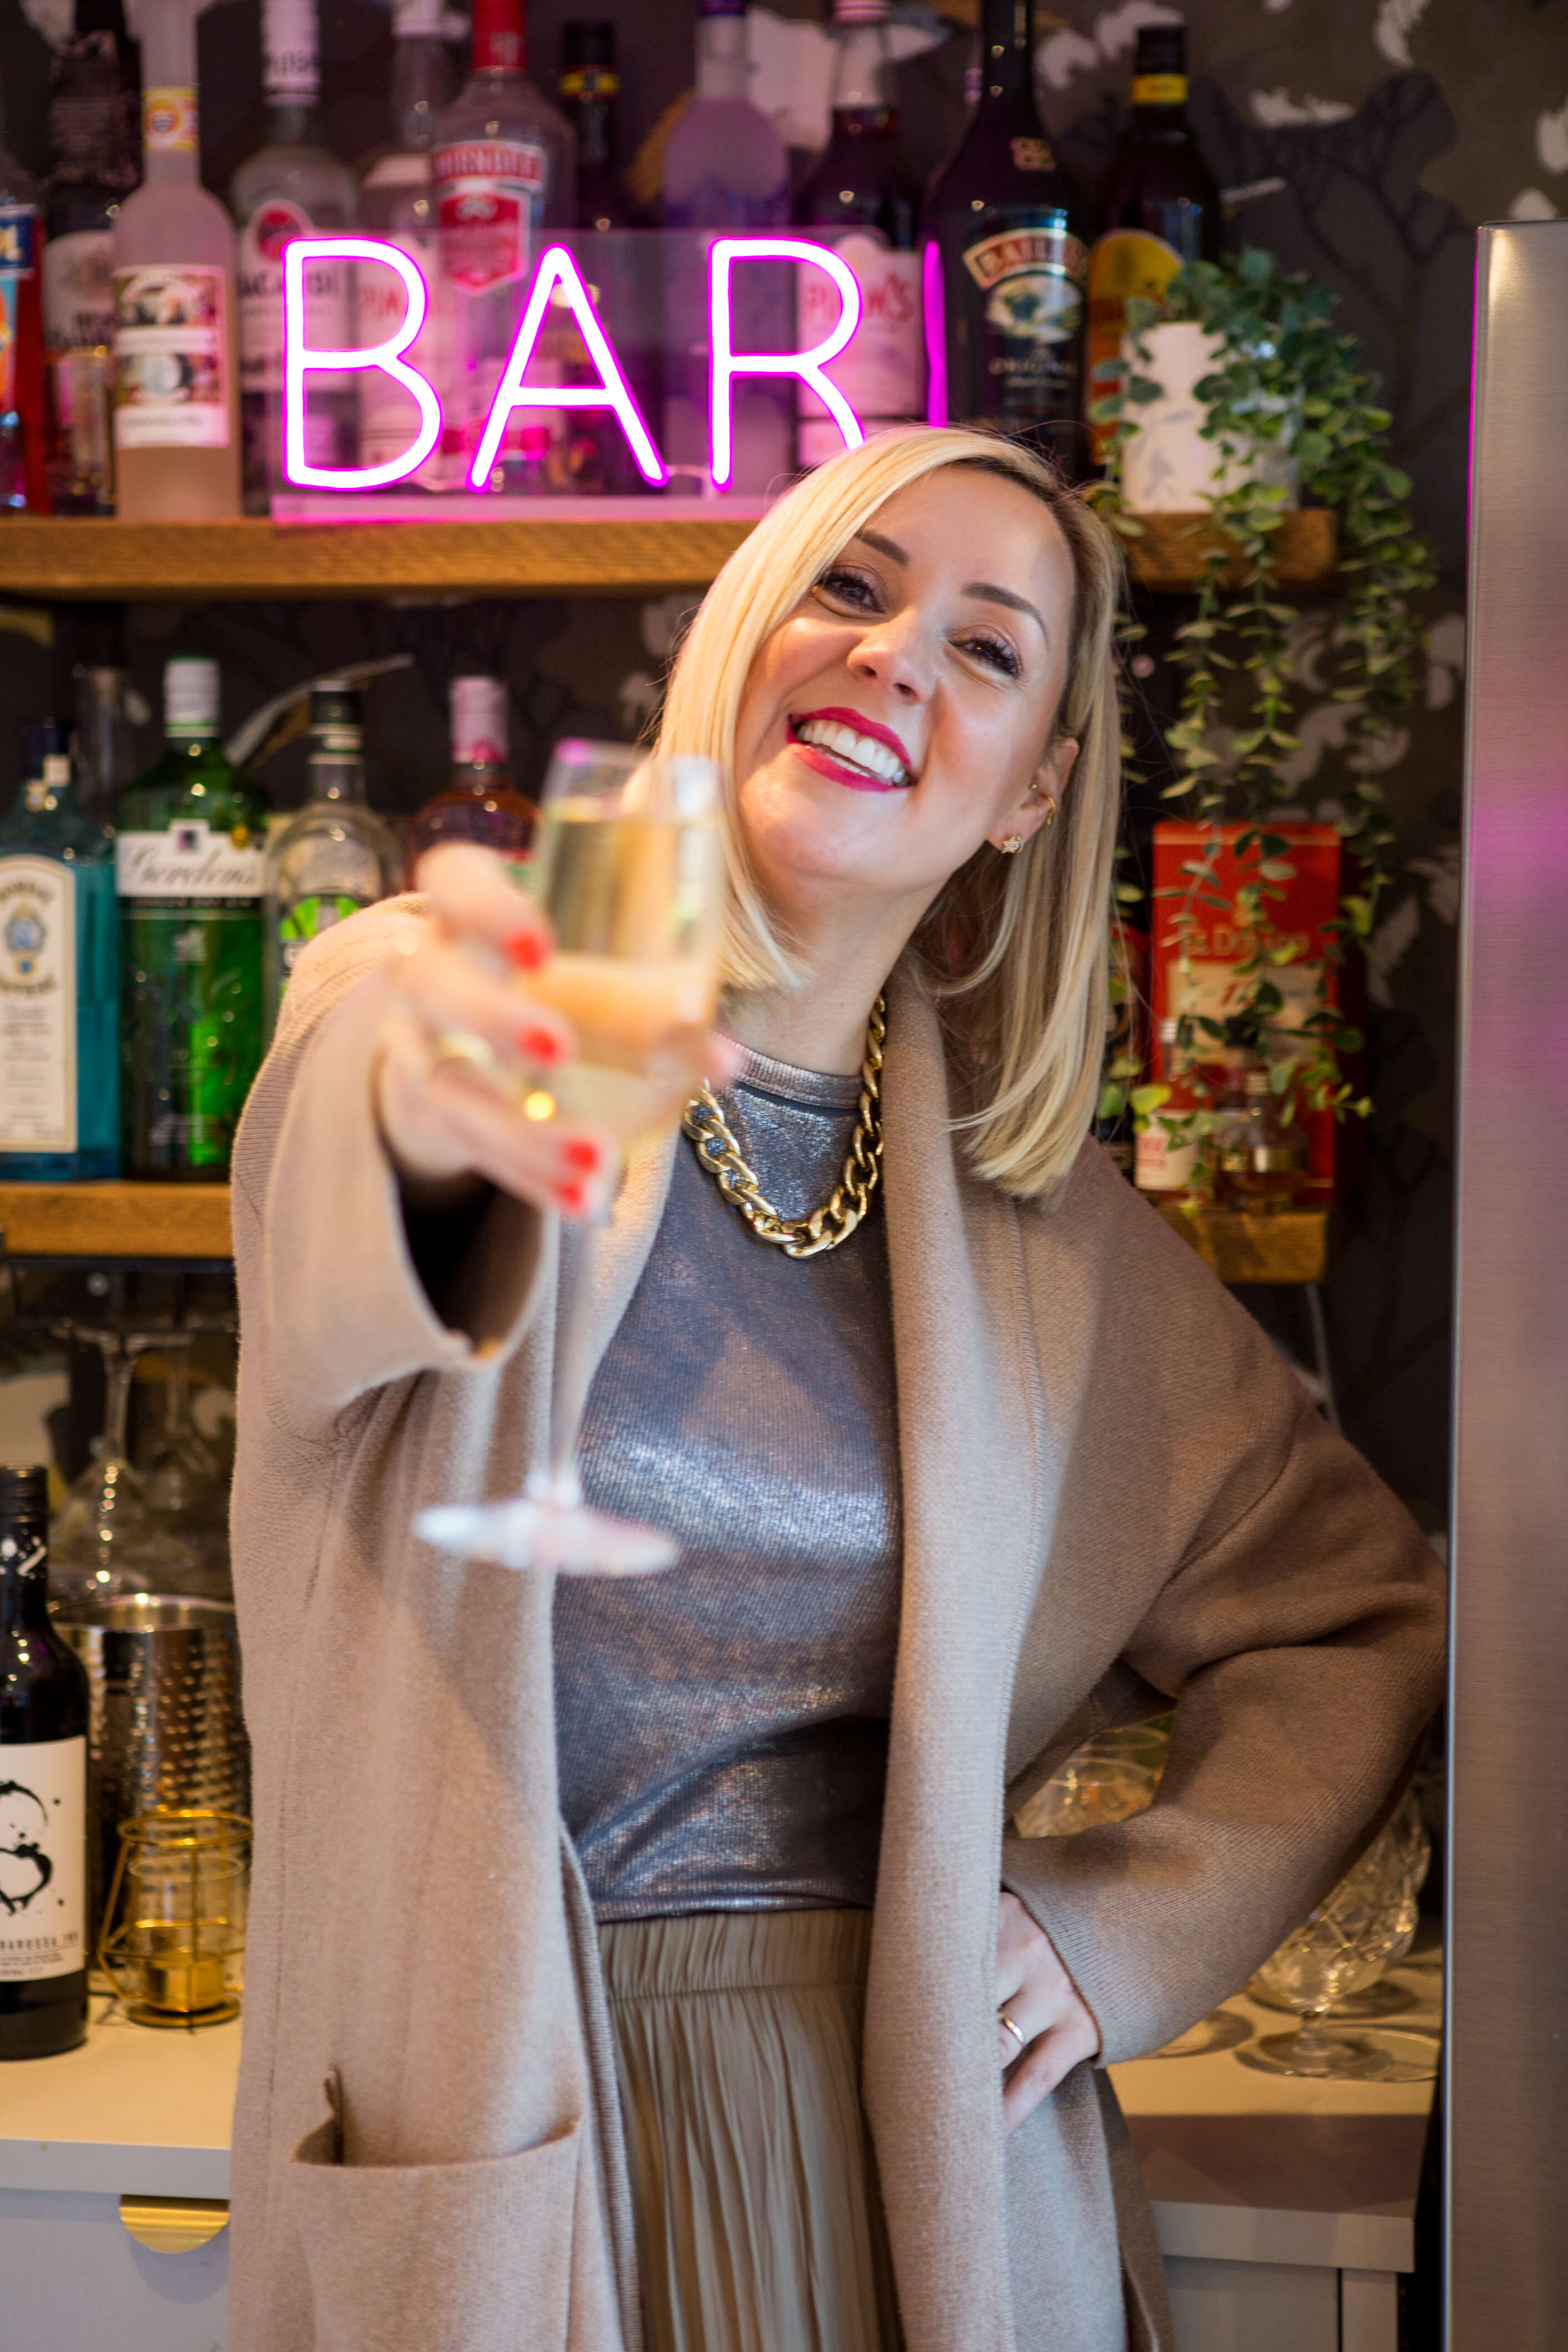 Woman in front of a bar holding a glass of champagne